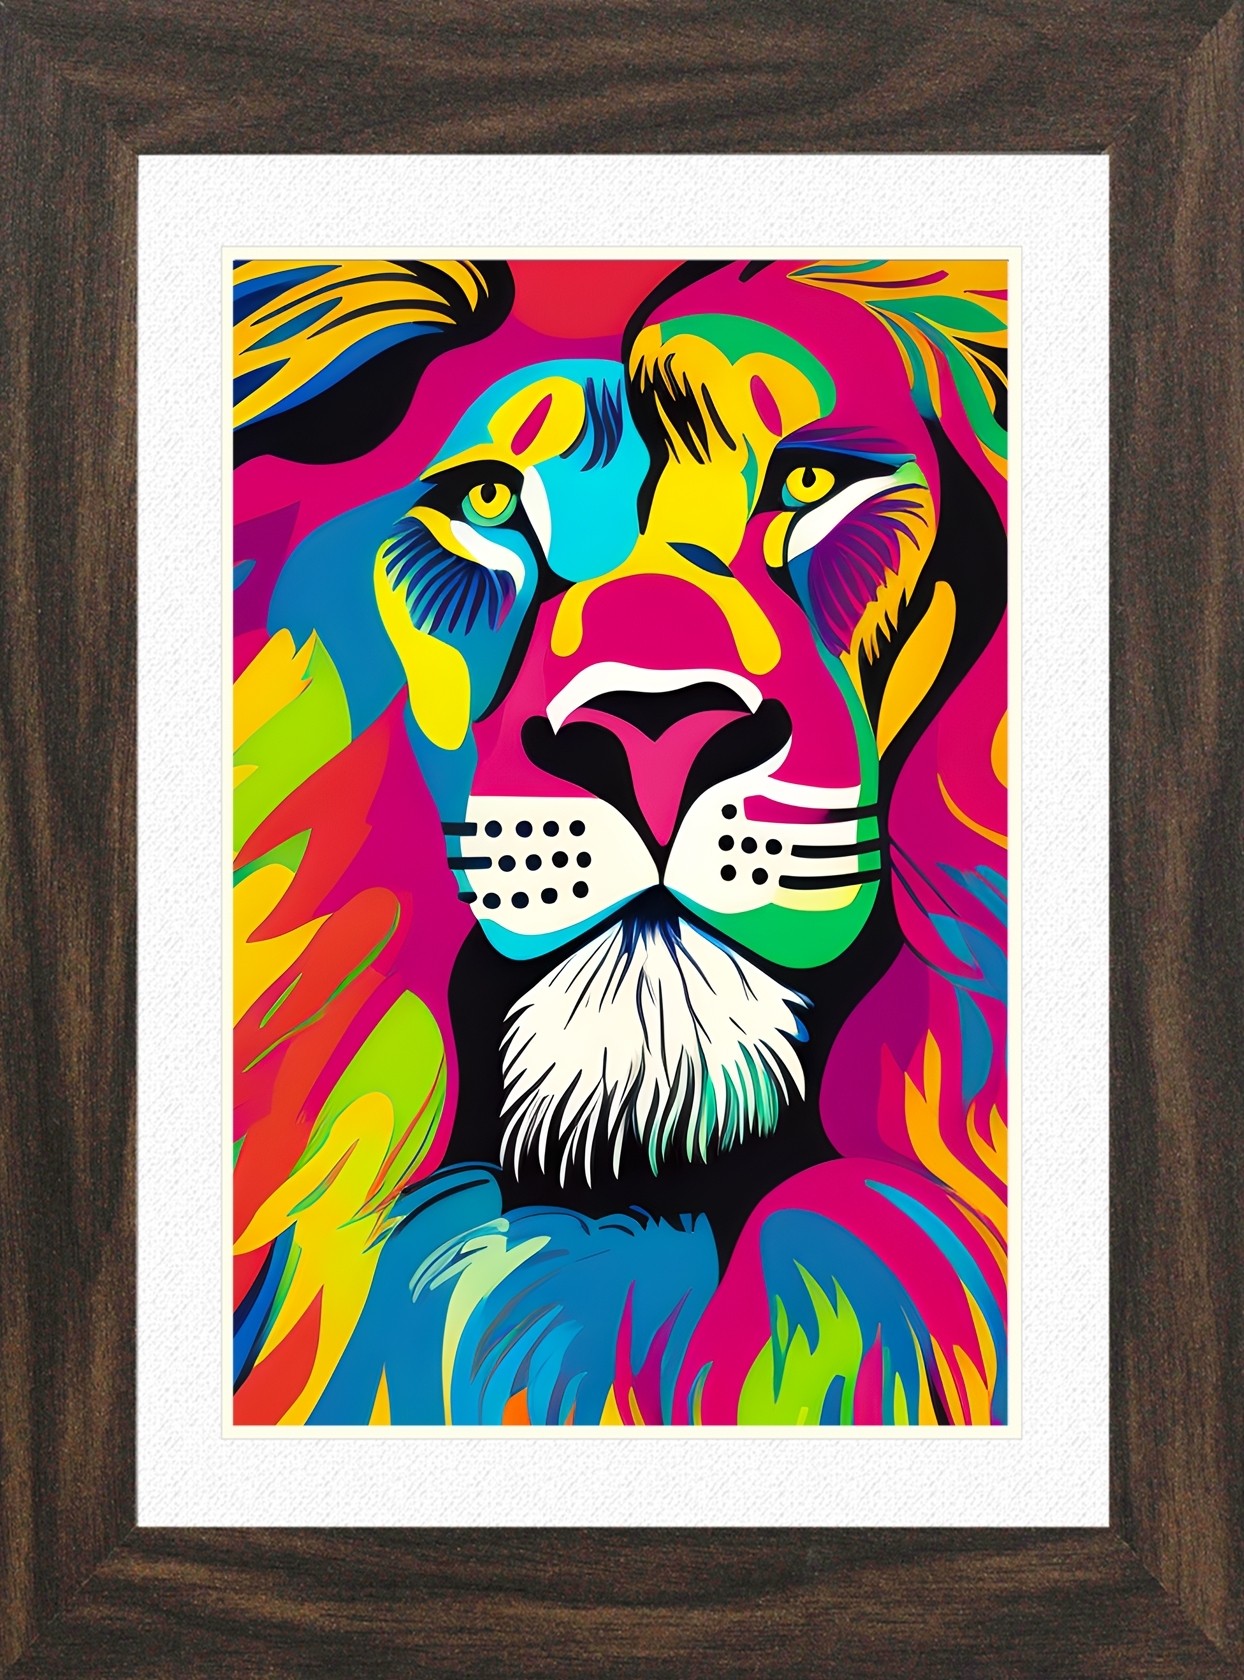 Lion Animal Picture Framed Colourful Abstract Art (25cm x 20cm Walnut Frame)